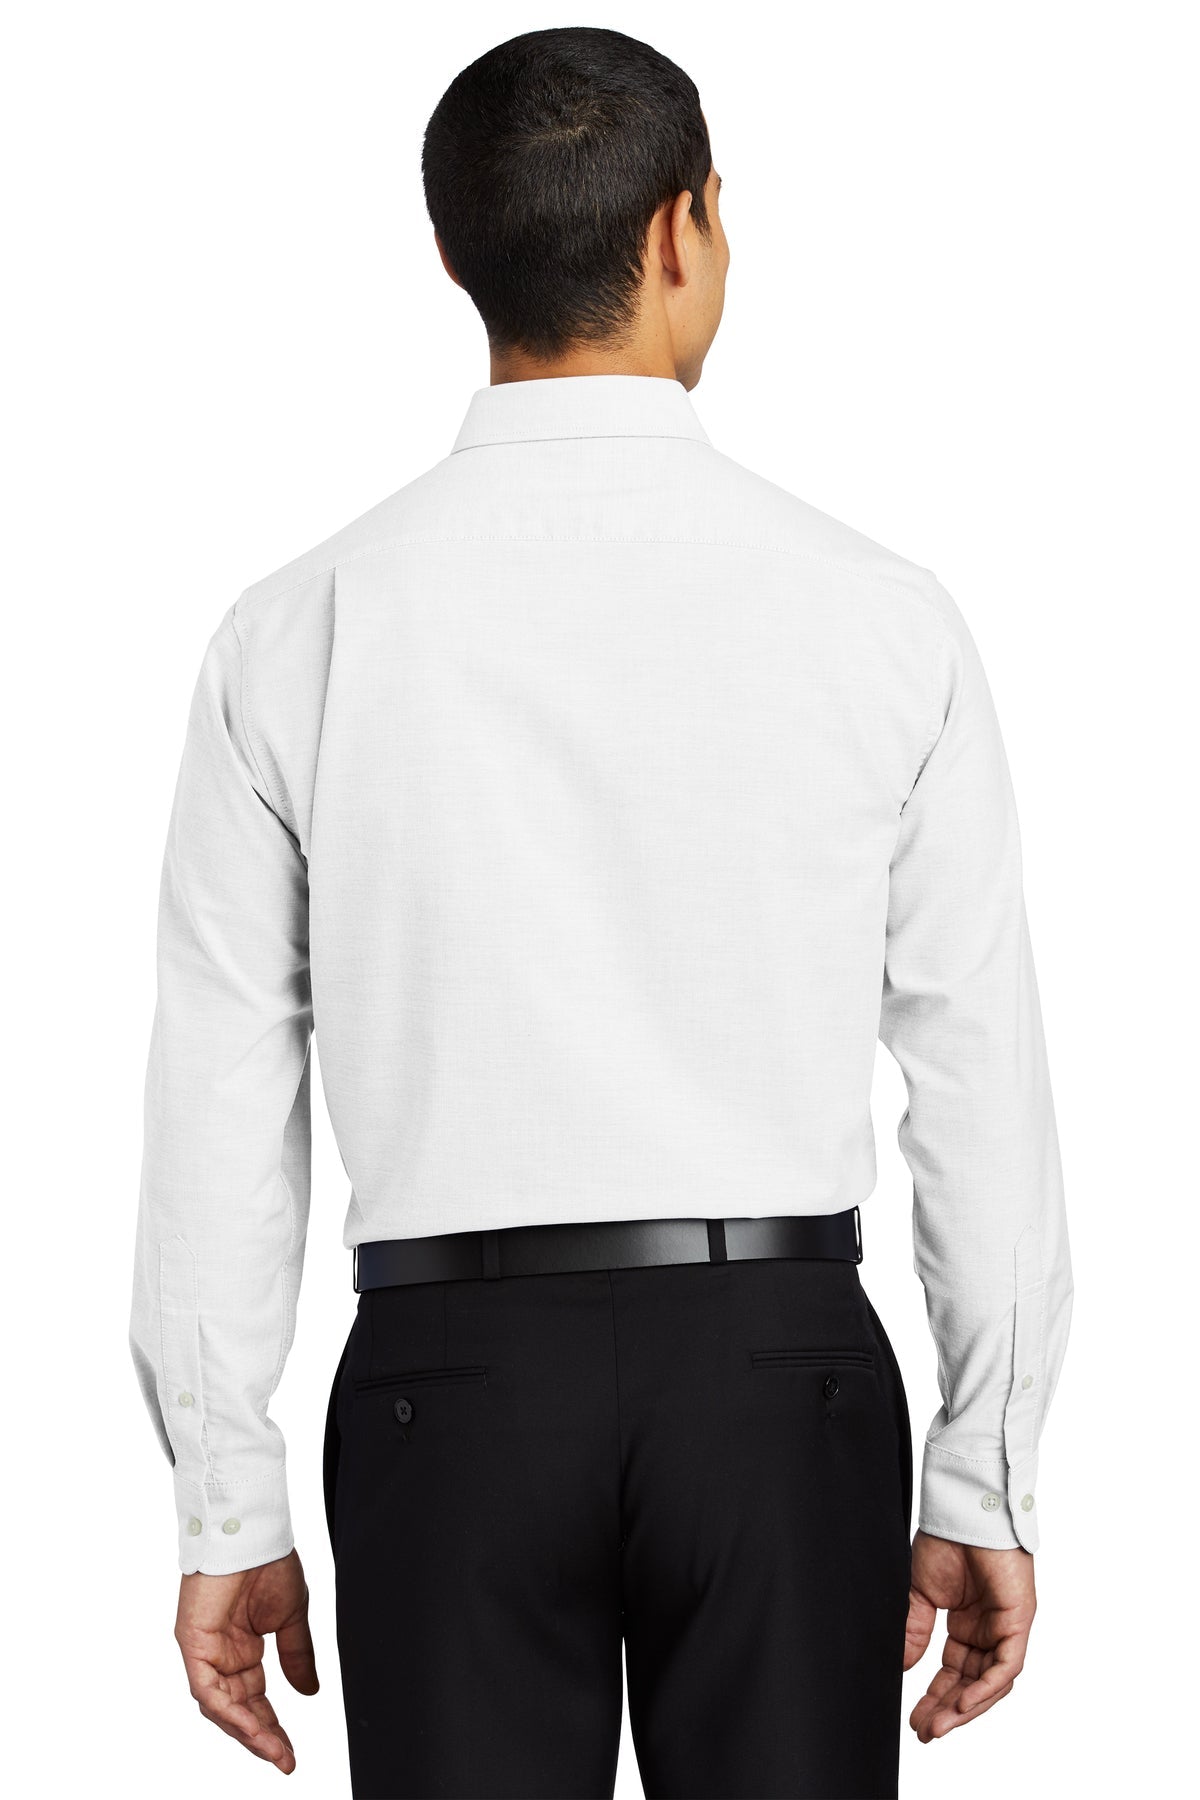 port authority_s658 _white_company_logo_button downs